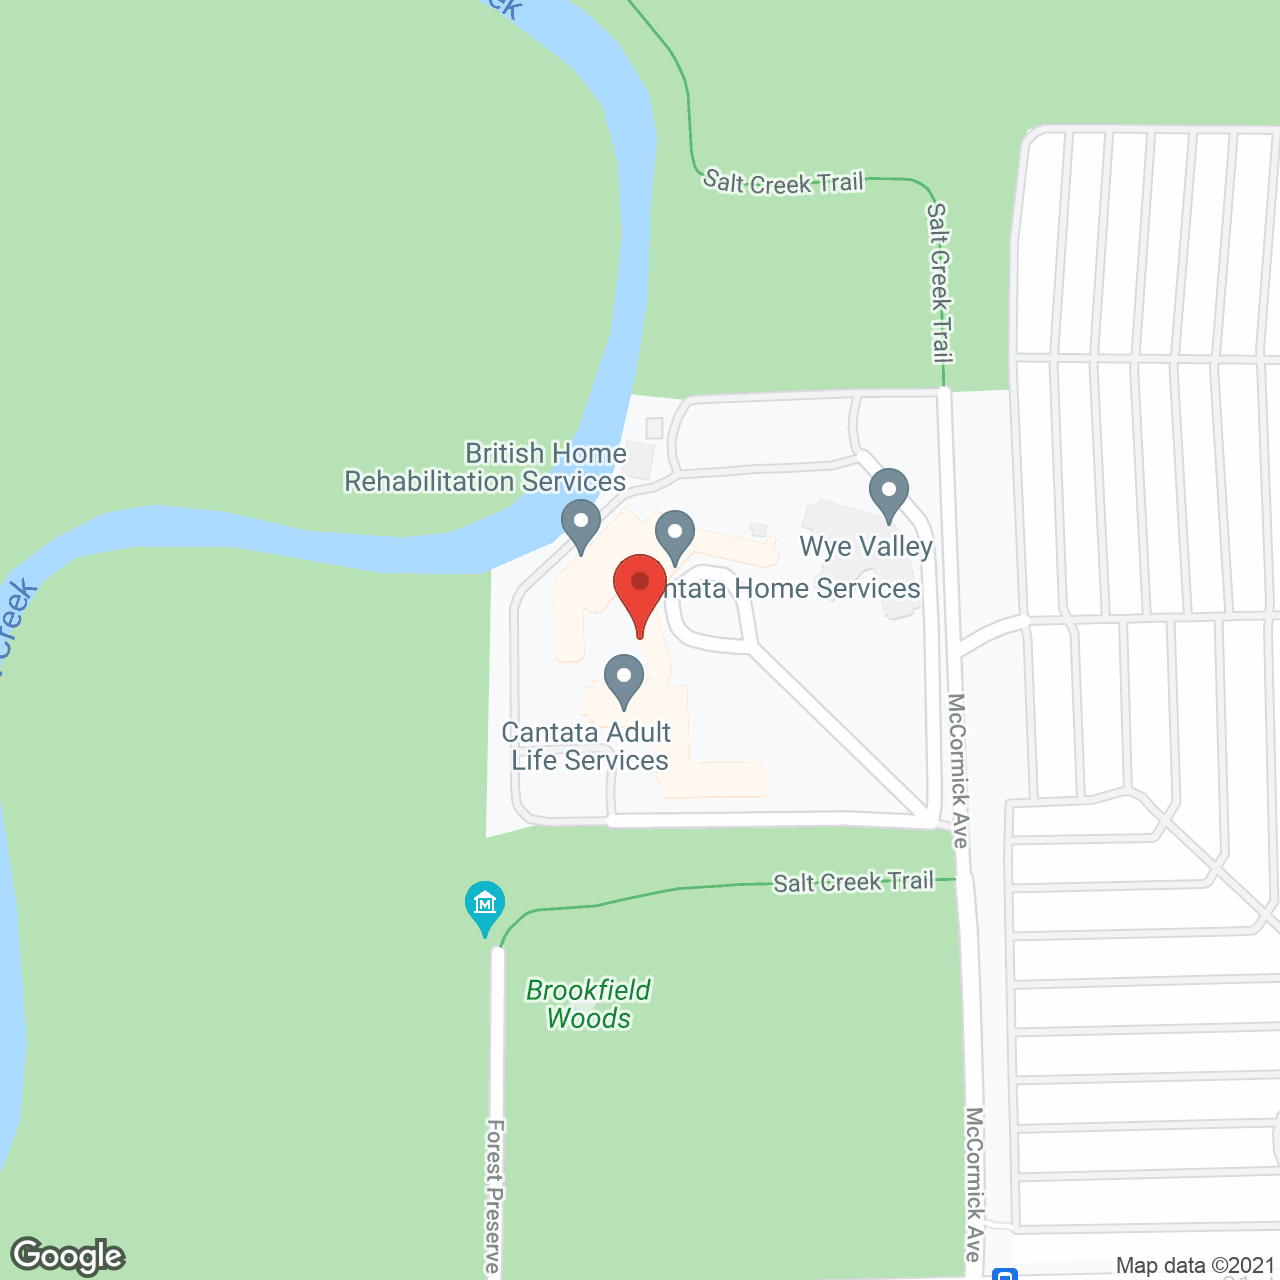 Cantata Adult Life Services a CCRC in google map